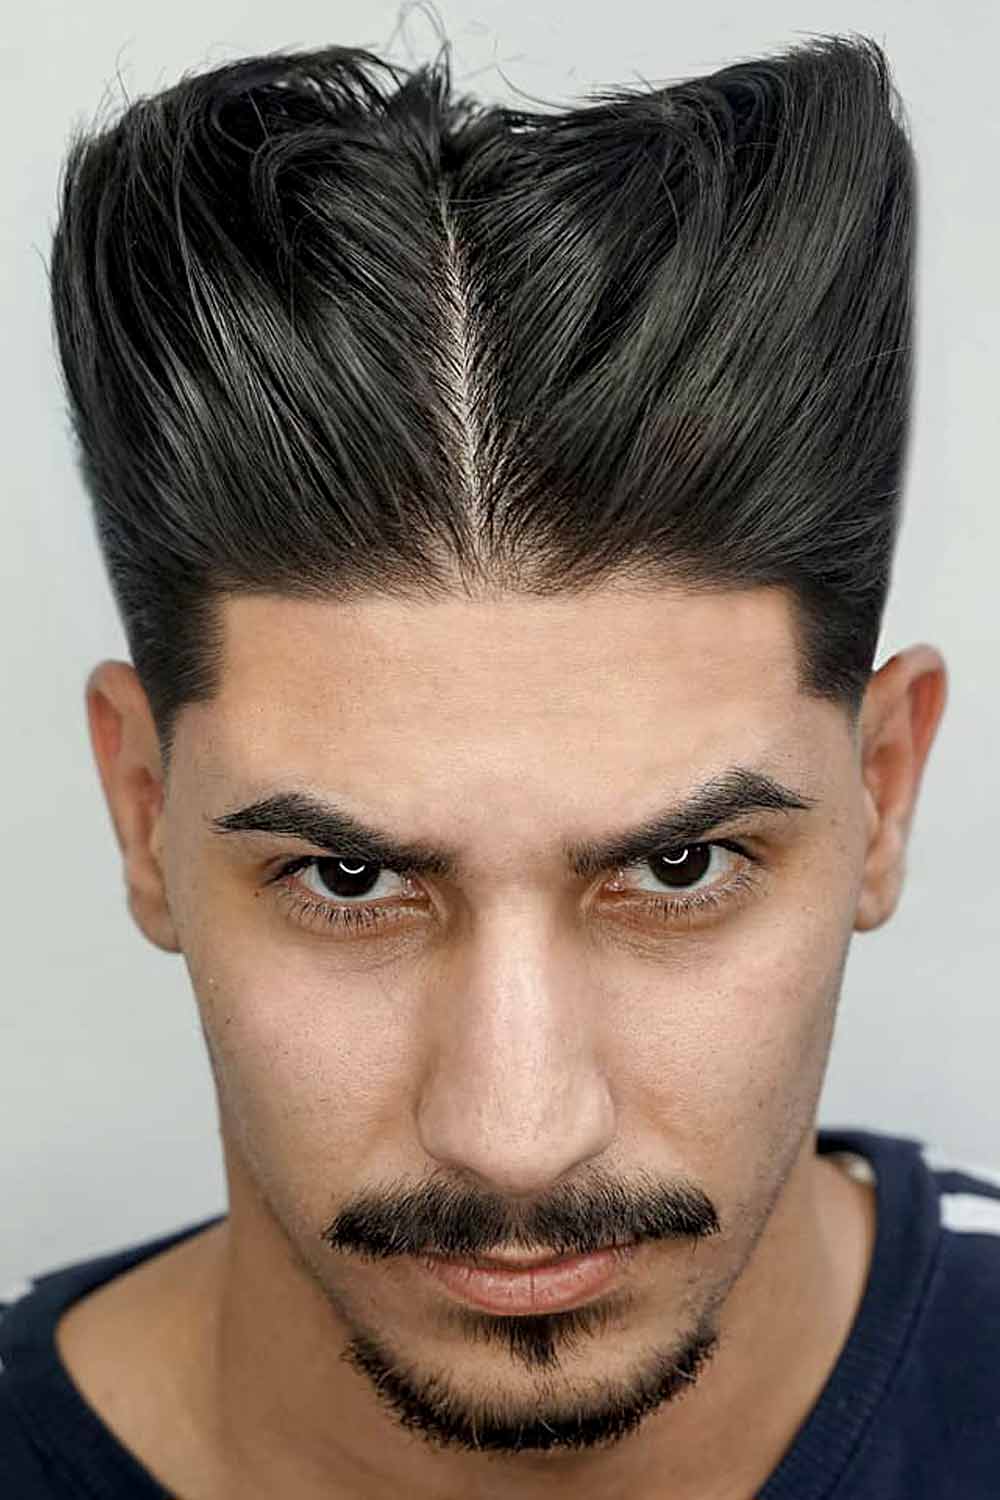 Middle Part Hair Cut with Combed Hair Men #middleparthairmen #middlepartmens #middleparthair